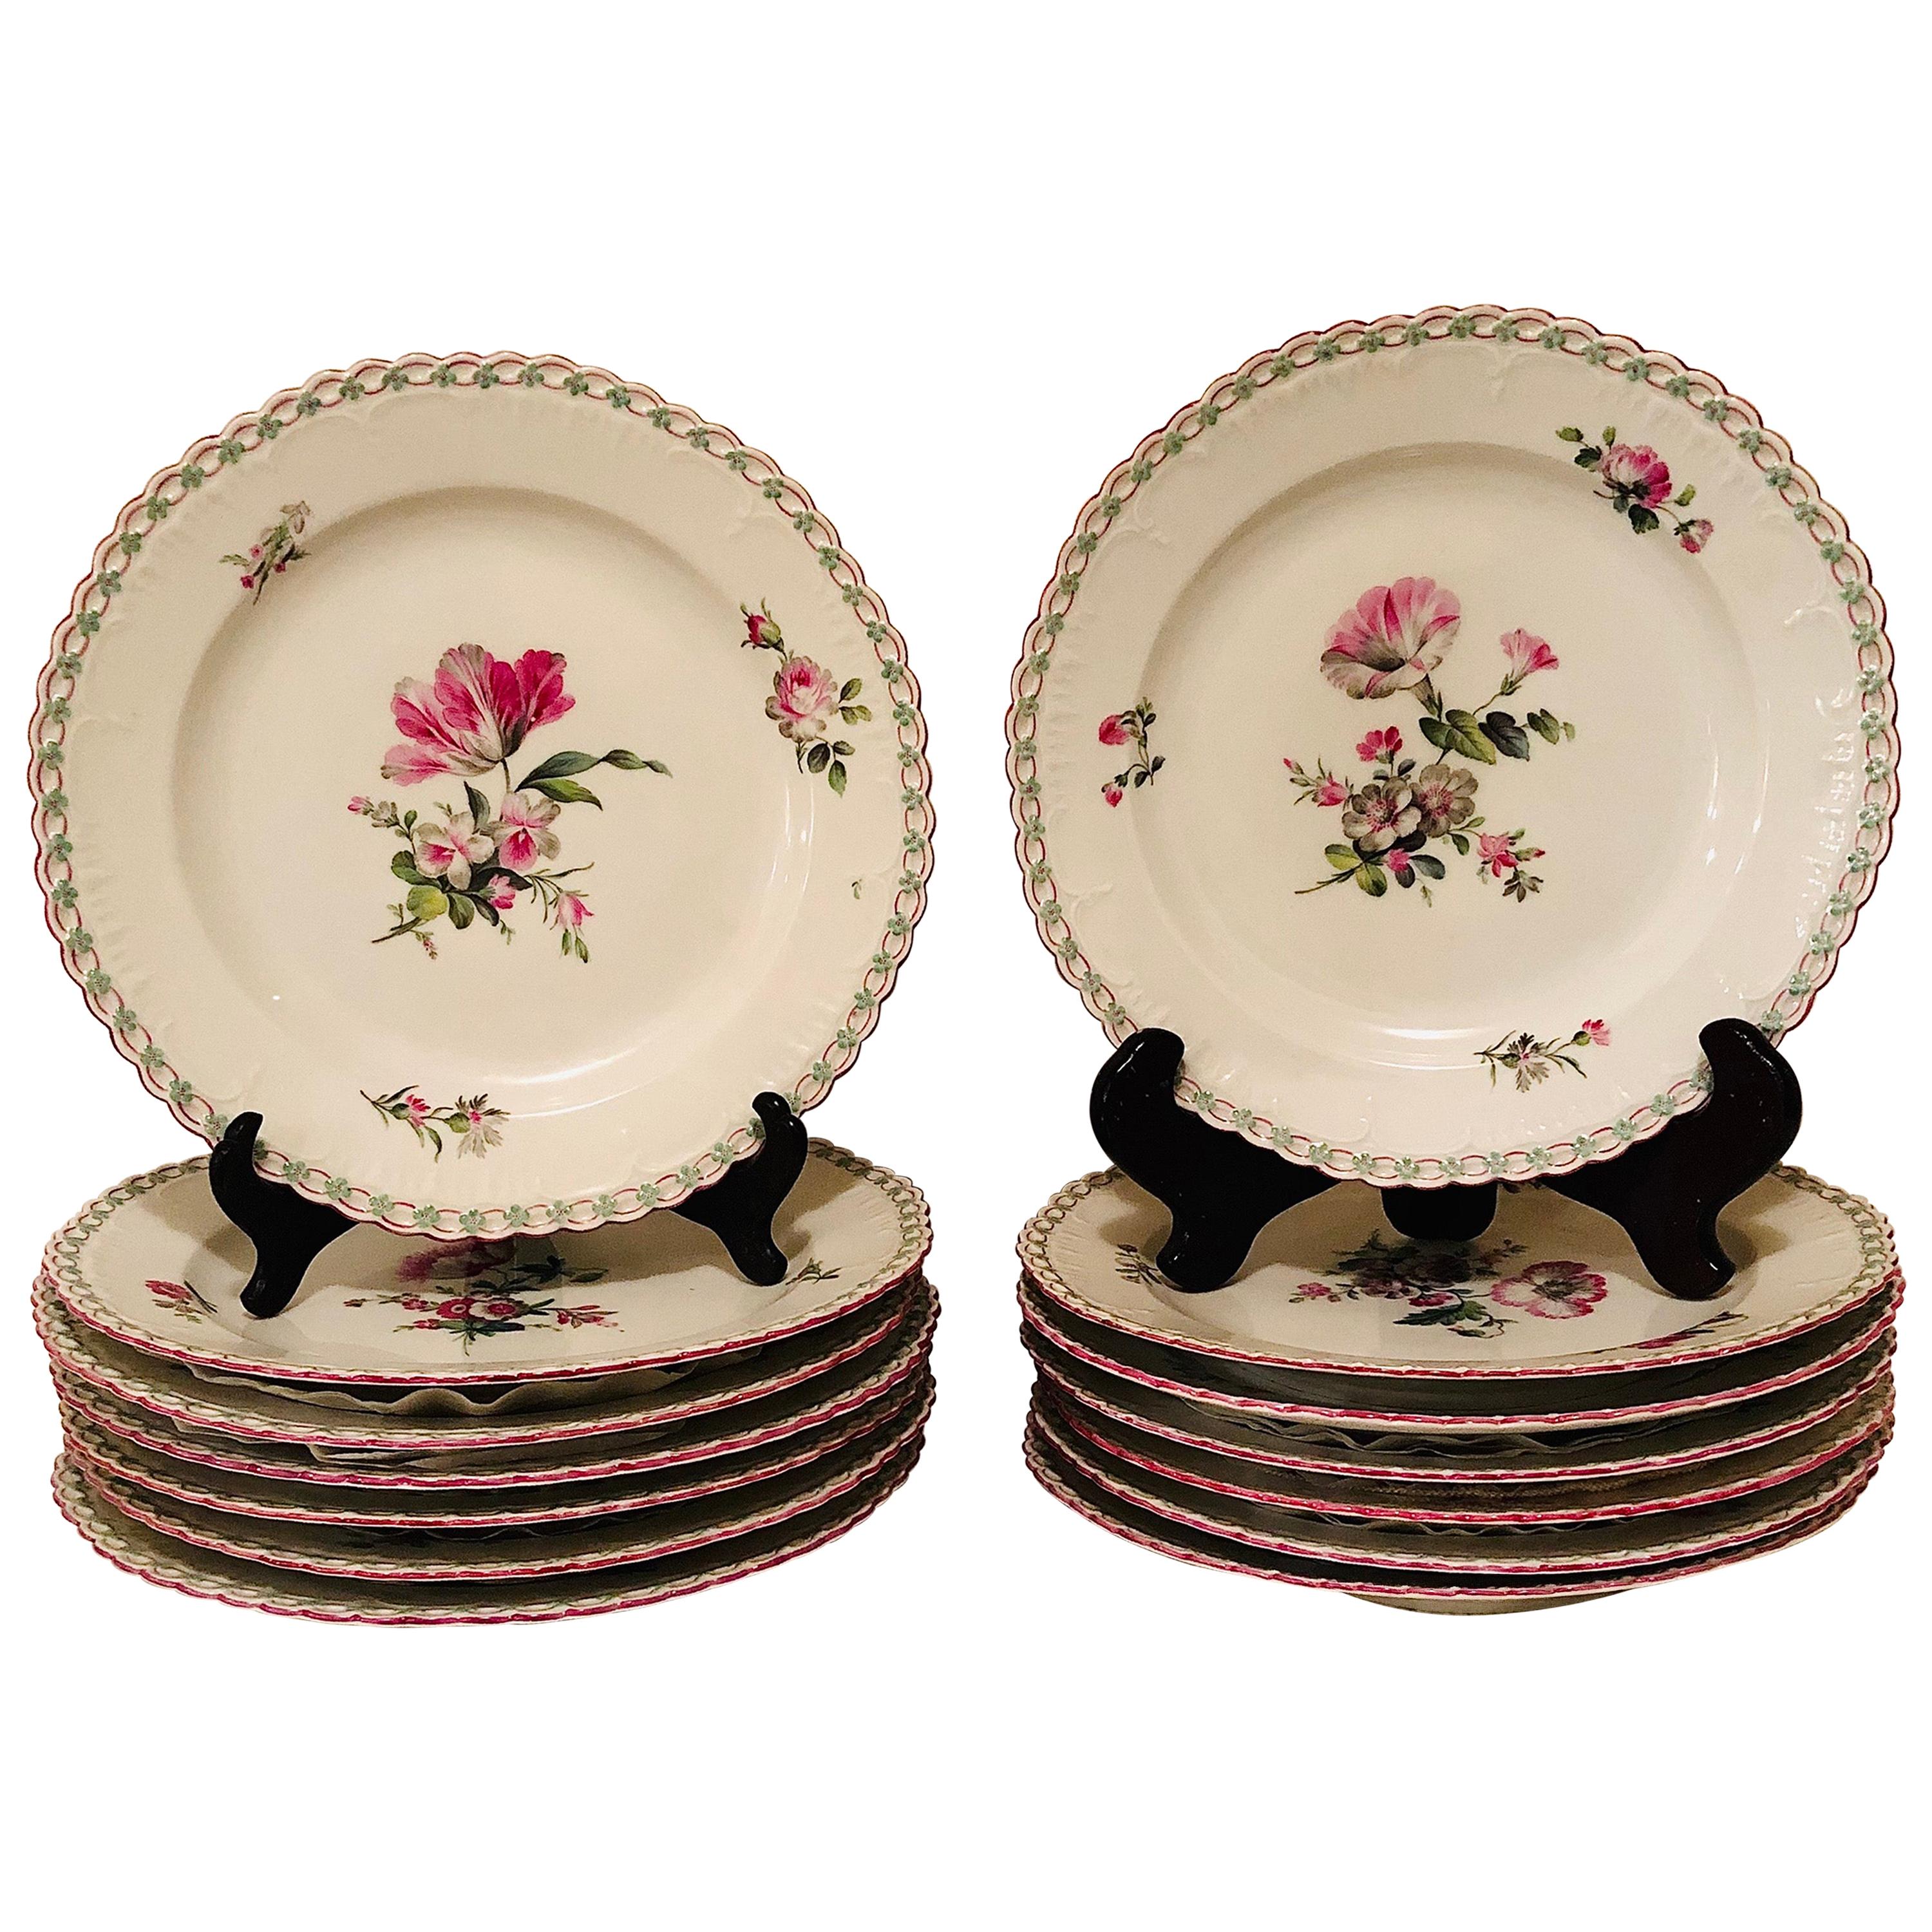 Set of 13 KPM Dinner Plates Each Painted Differently With Raised Forget Me Nots